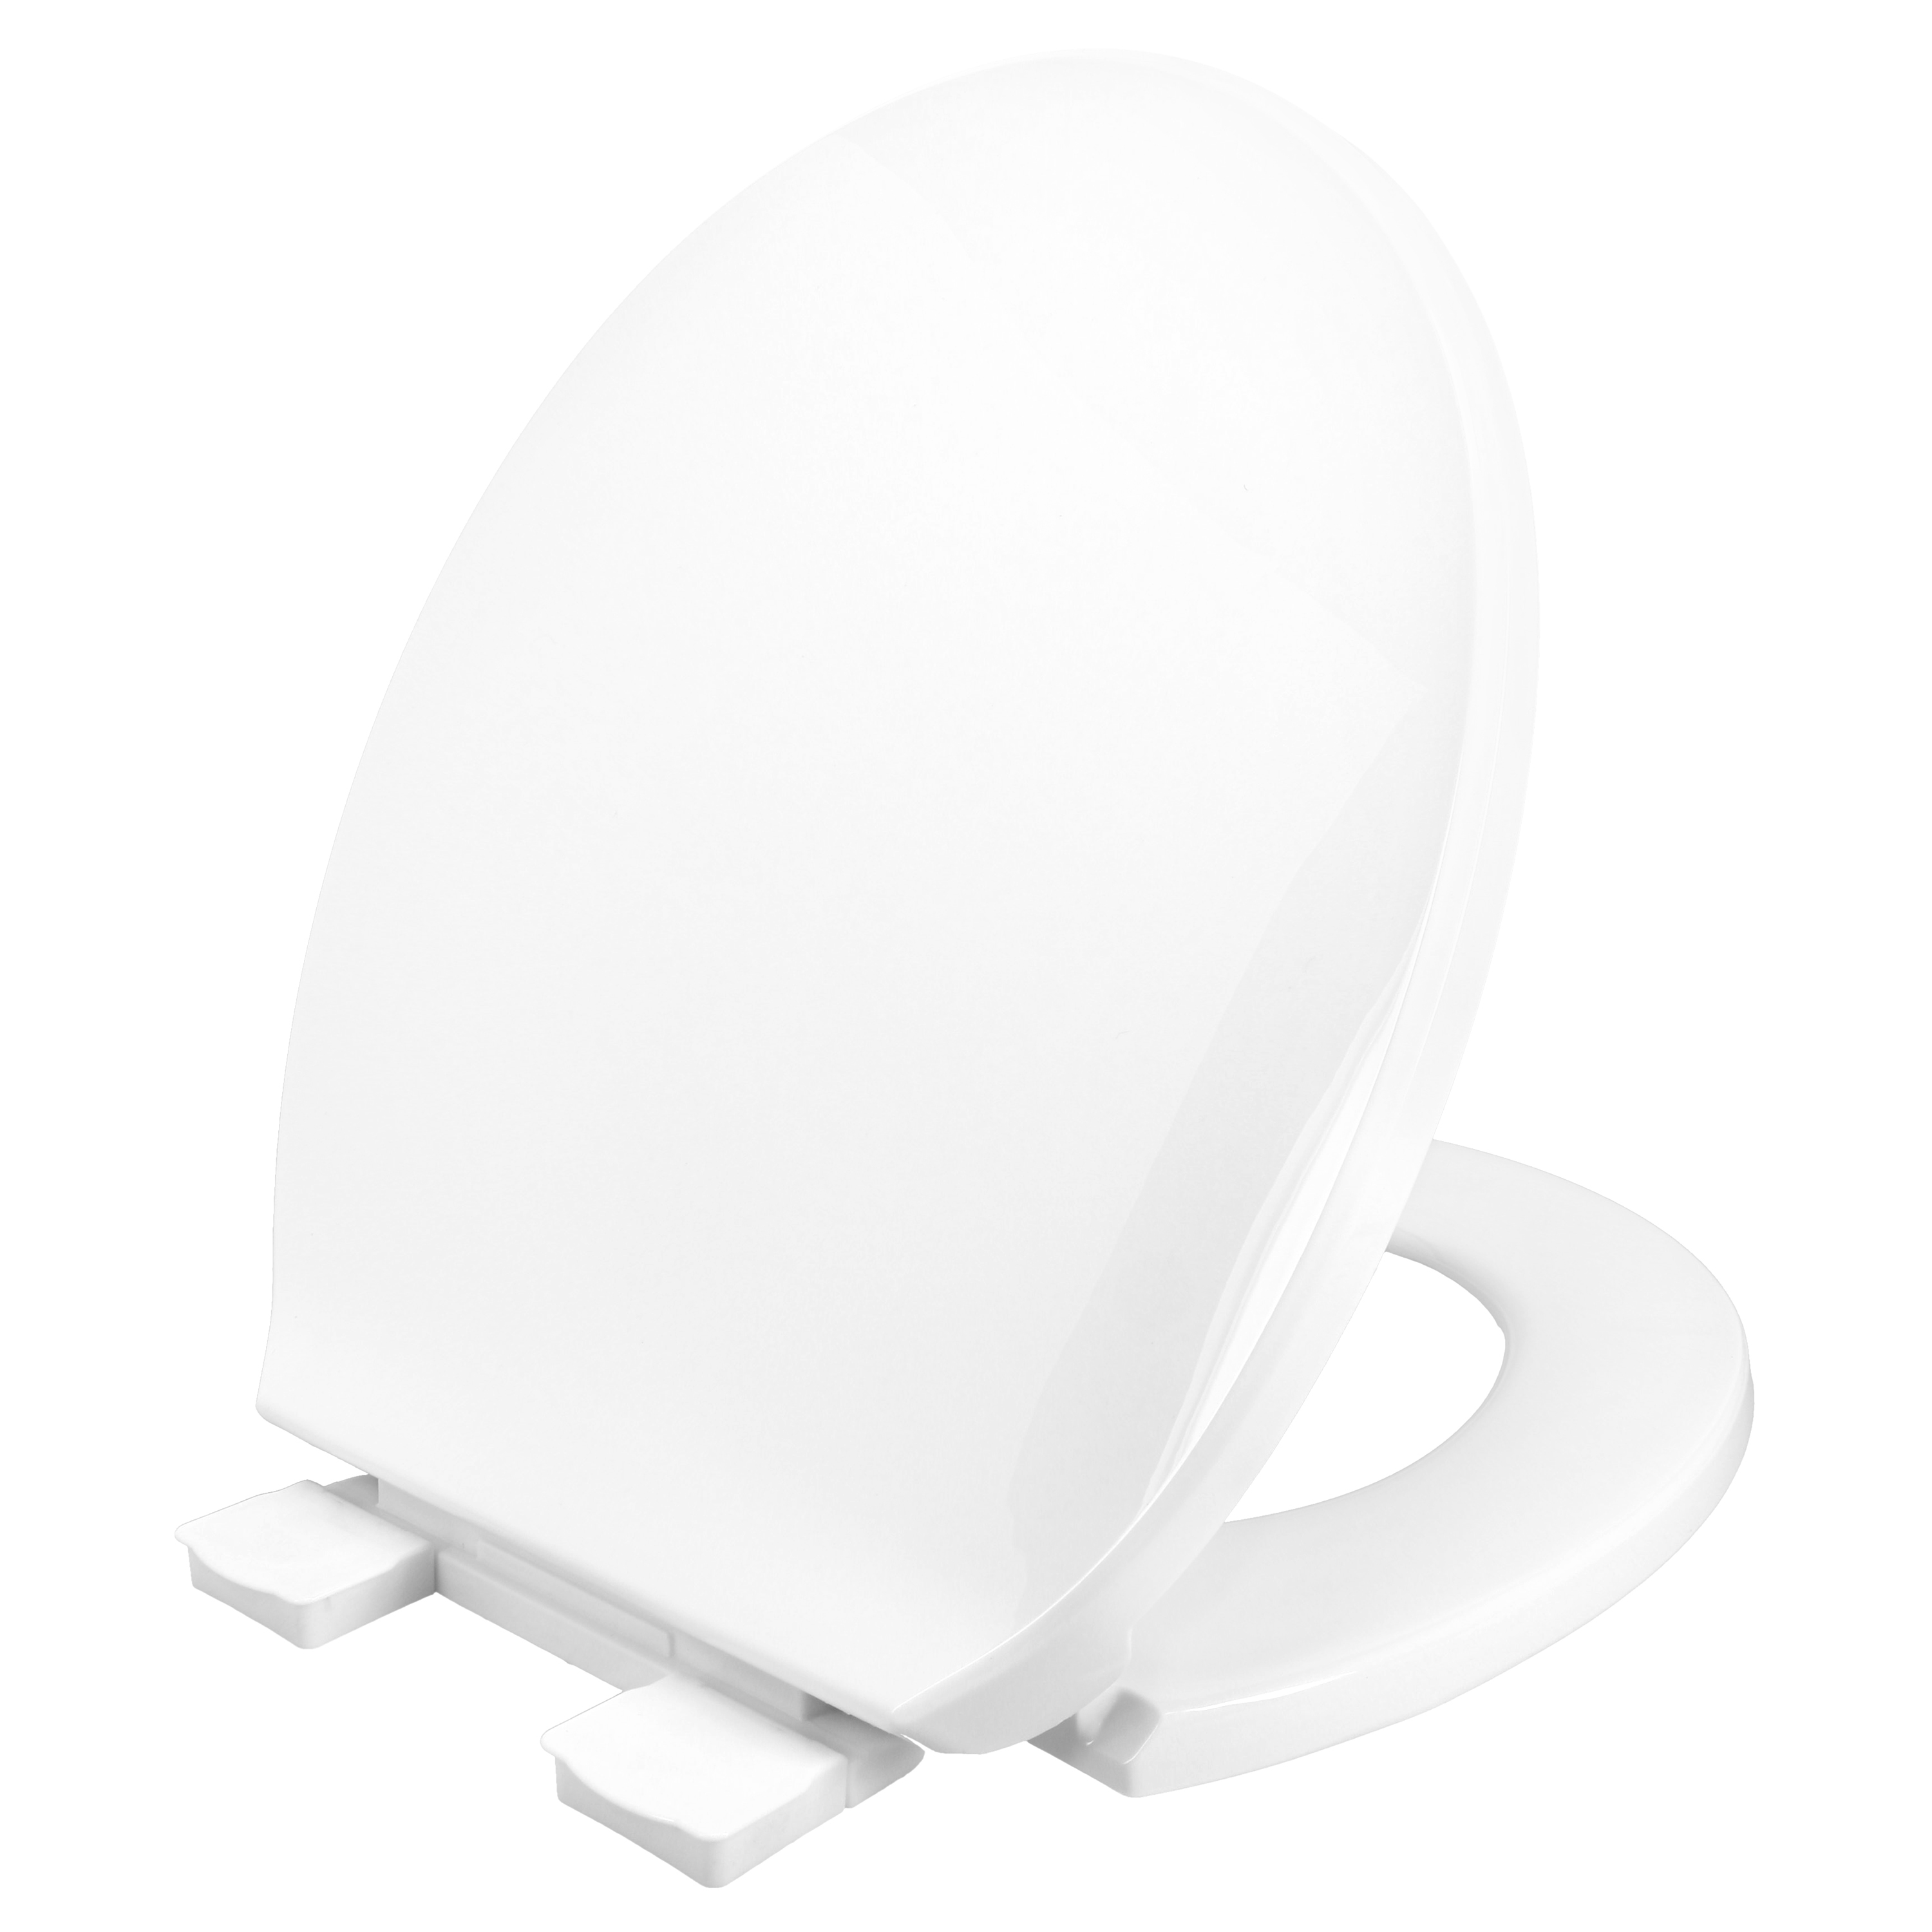 Clorox Antimicrobial Round Stay Fresh Scented Plastic Toilet Seat with Easy-off Hinges - image 3 of 11